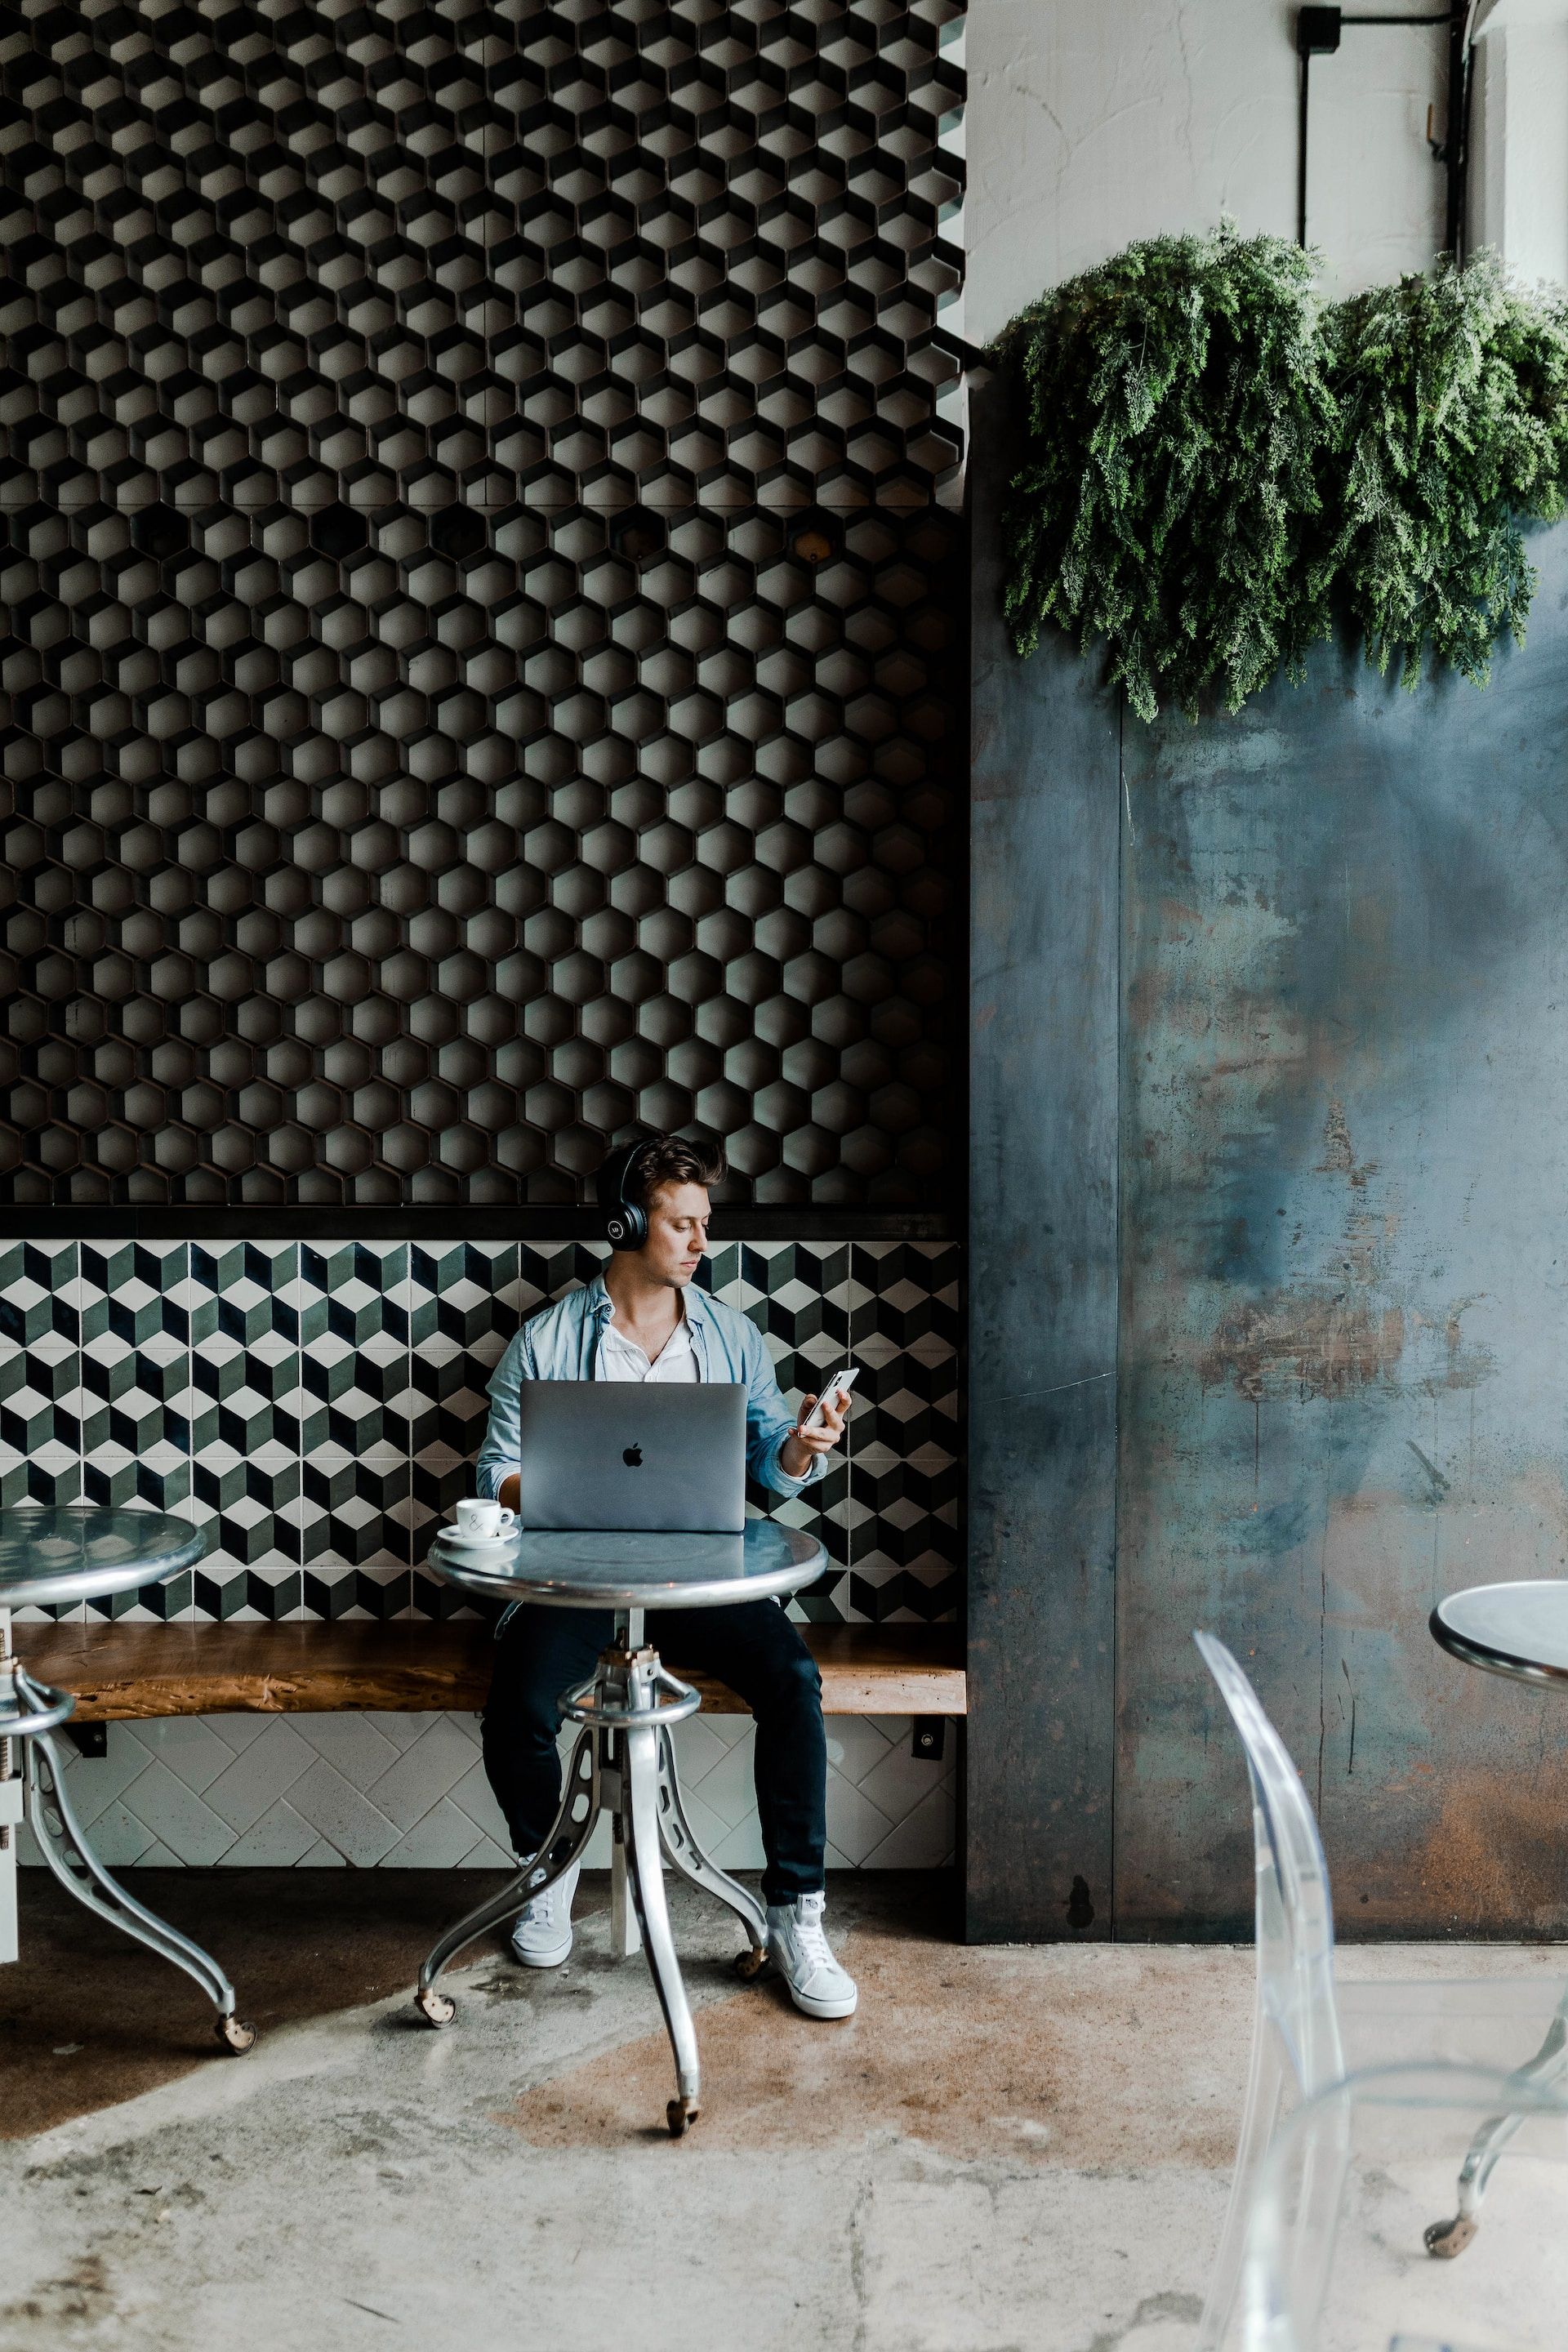 A digital nomad working at a café 